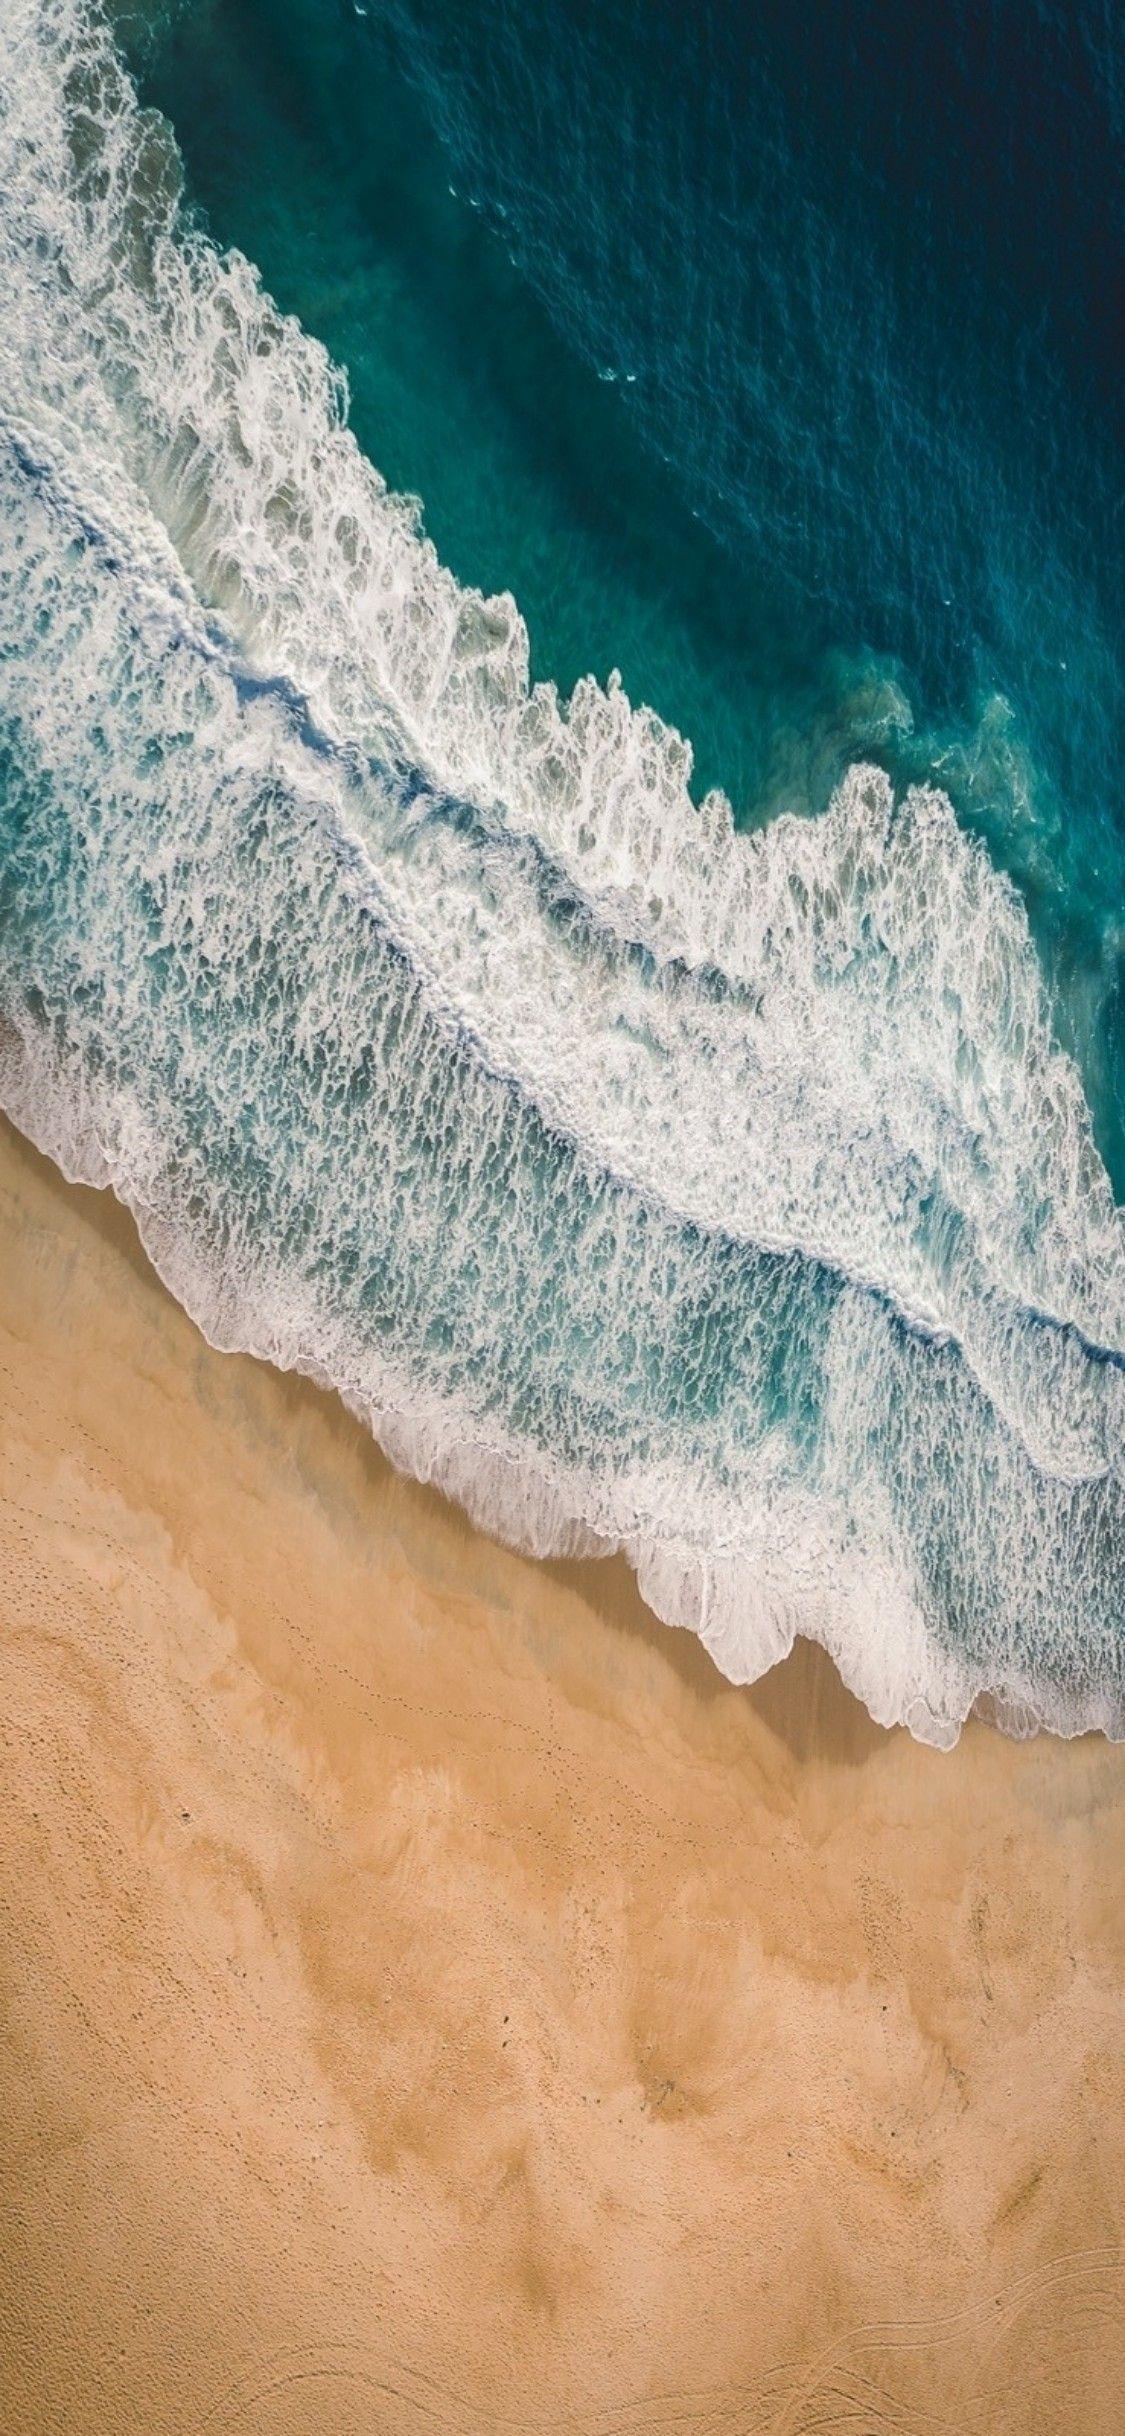 S s note wallpaper, background, nature, tranquil, sea, beach